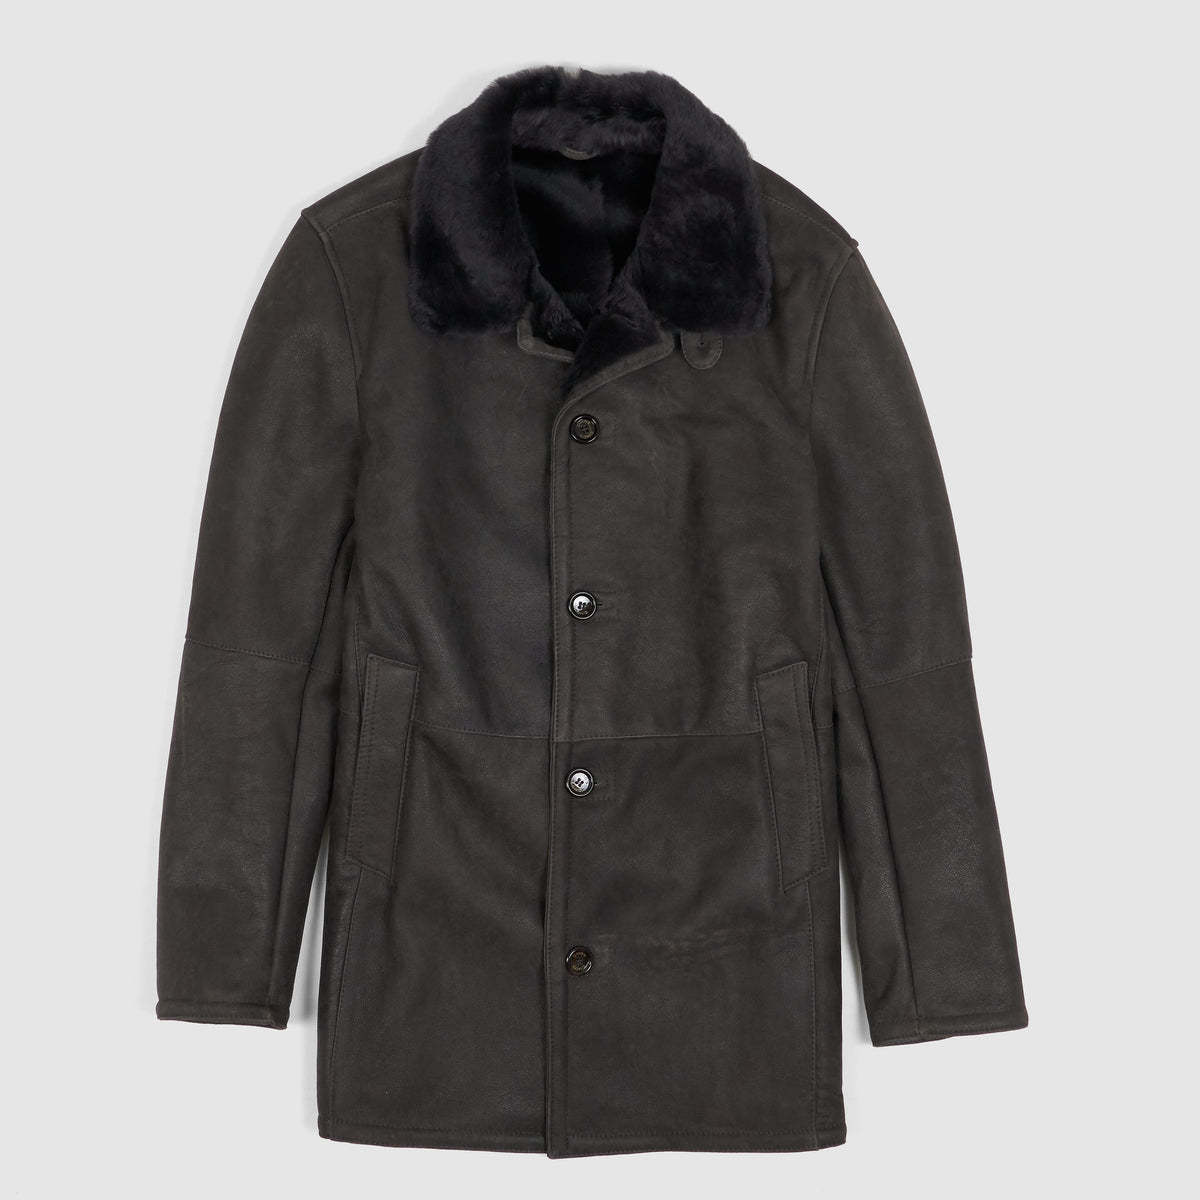 Gimos Soft Shearling Leather Coat